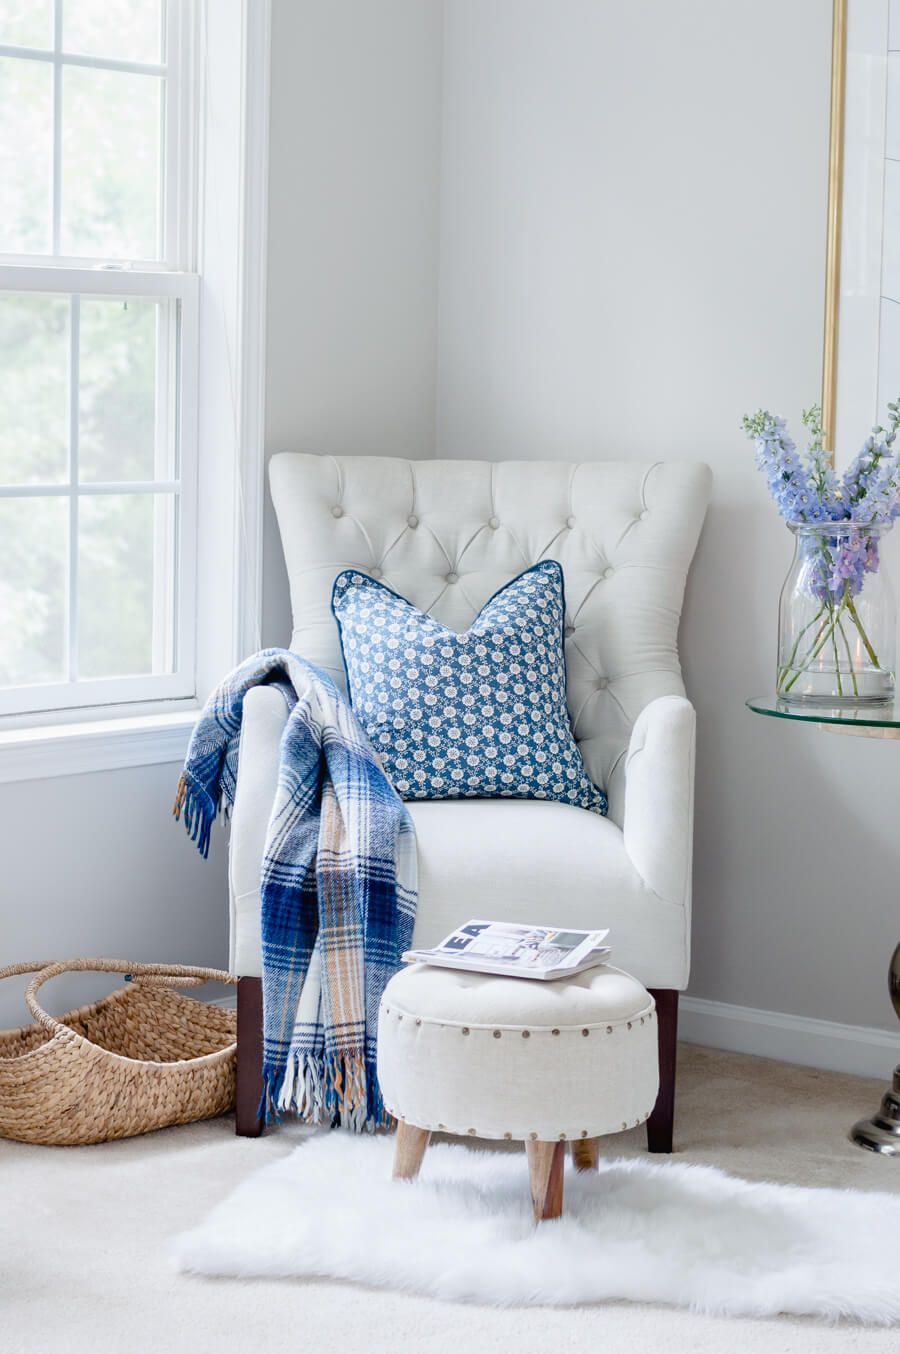 5 Easy Tips For A Cozy Master Bedroom Sitting Area – The Home I Create